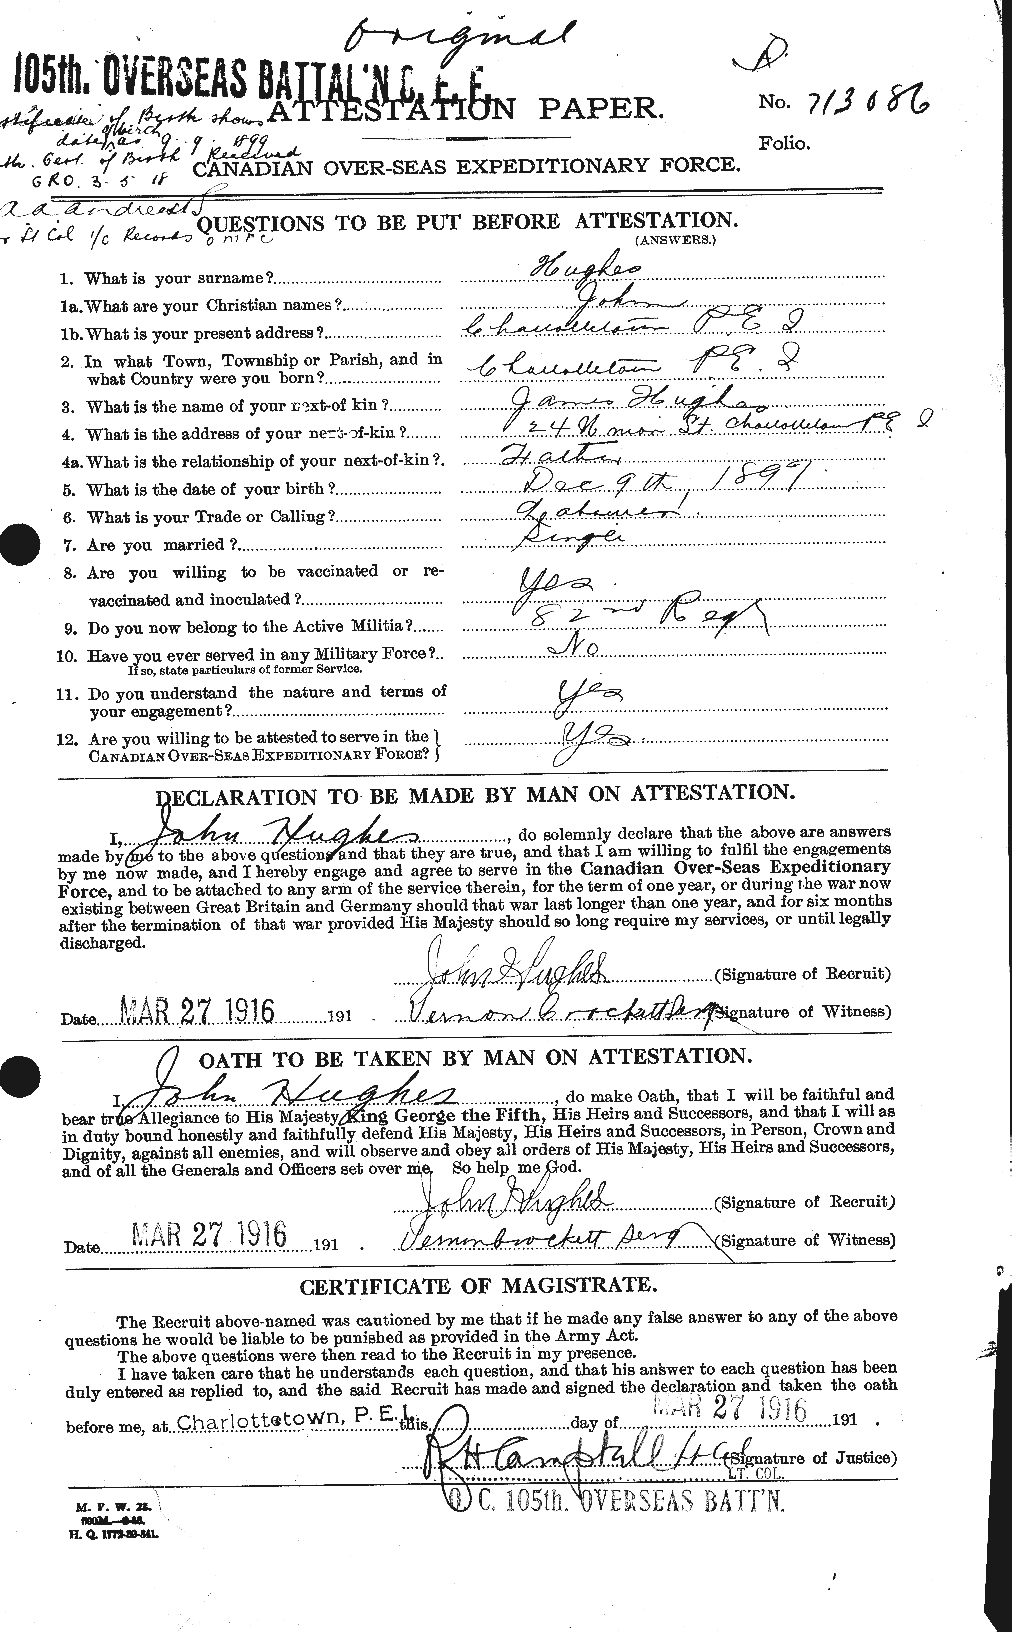 Personnel Records of the First World War - CEF 403979a